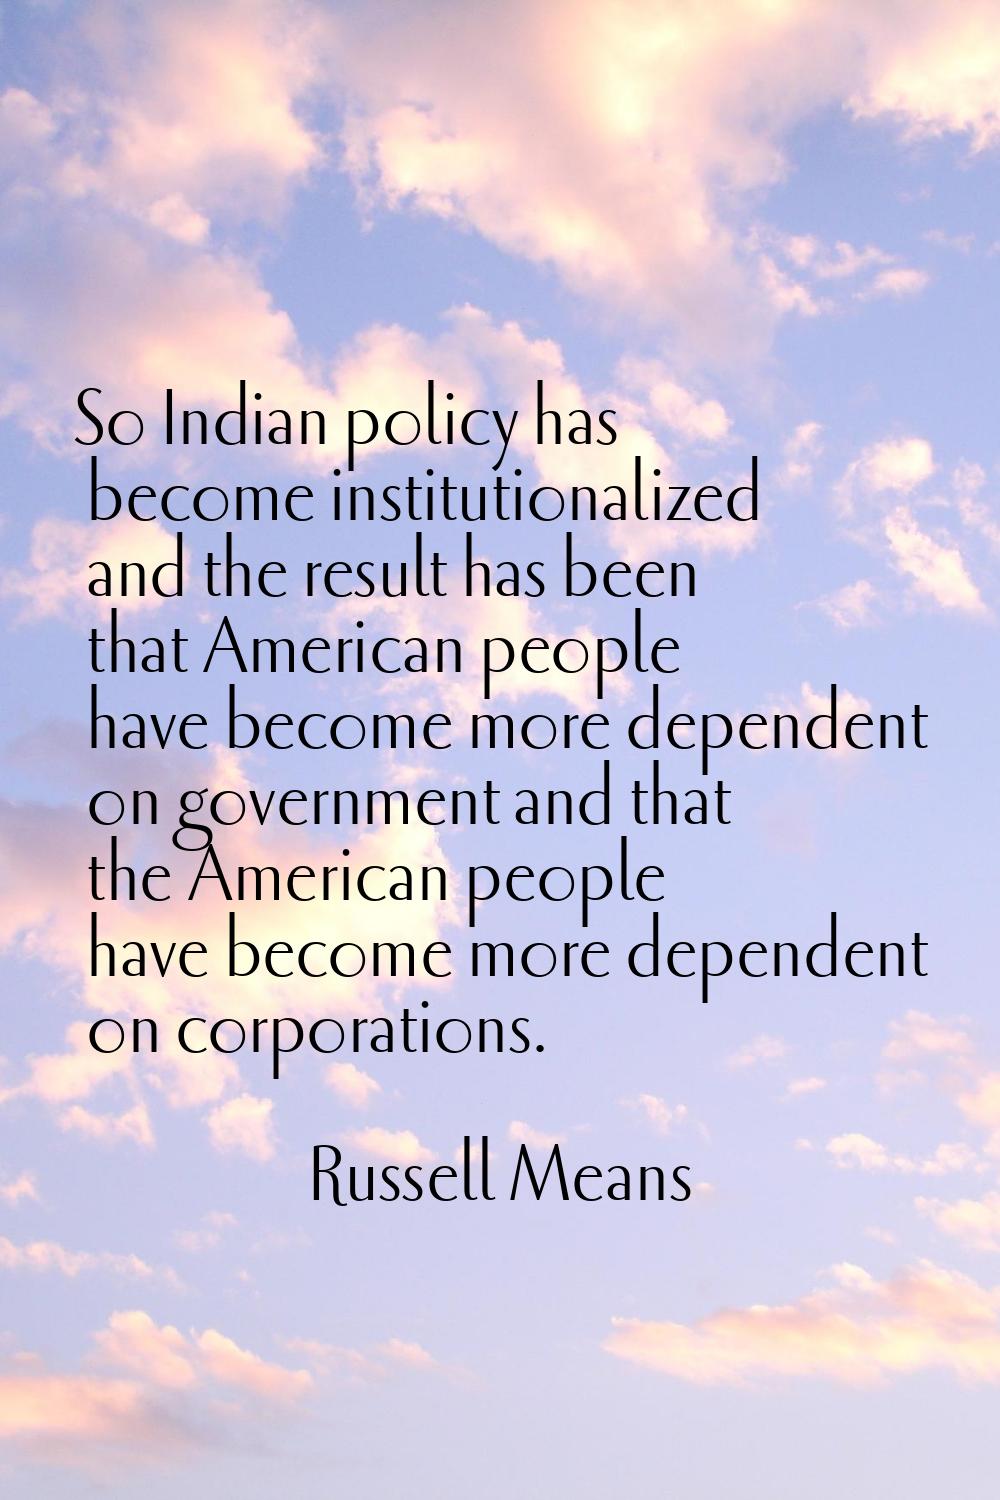 So Indian policy has become institutionalized and the result has been that American people have bec